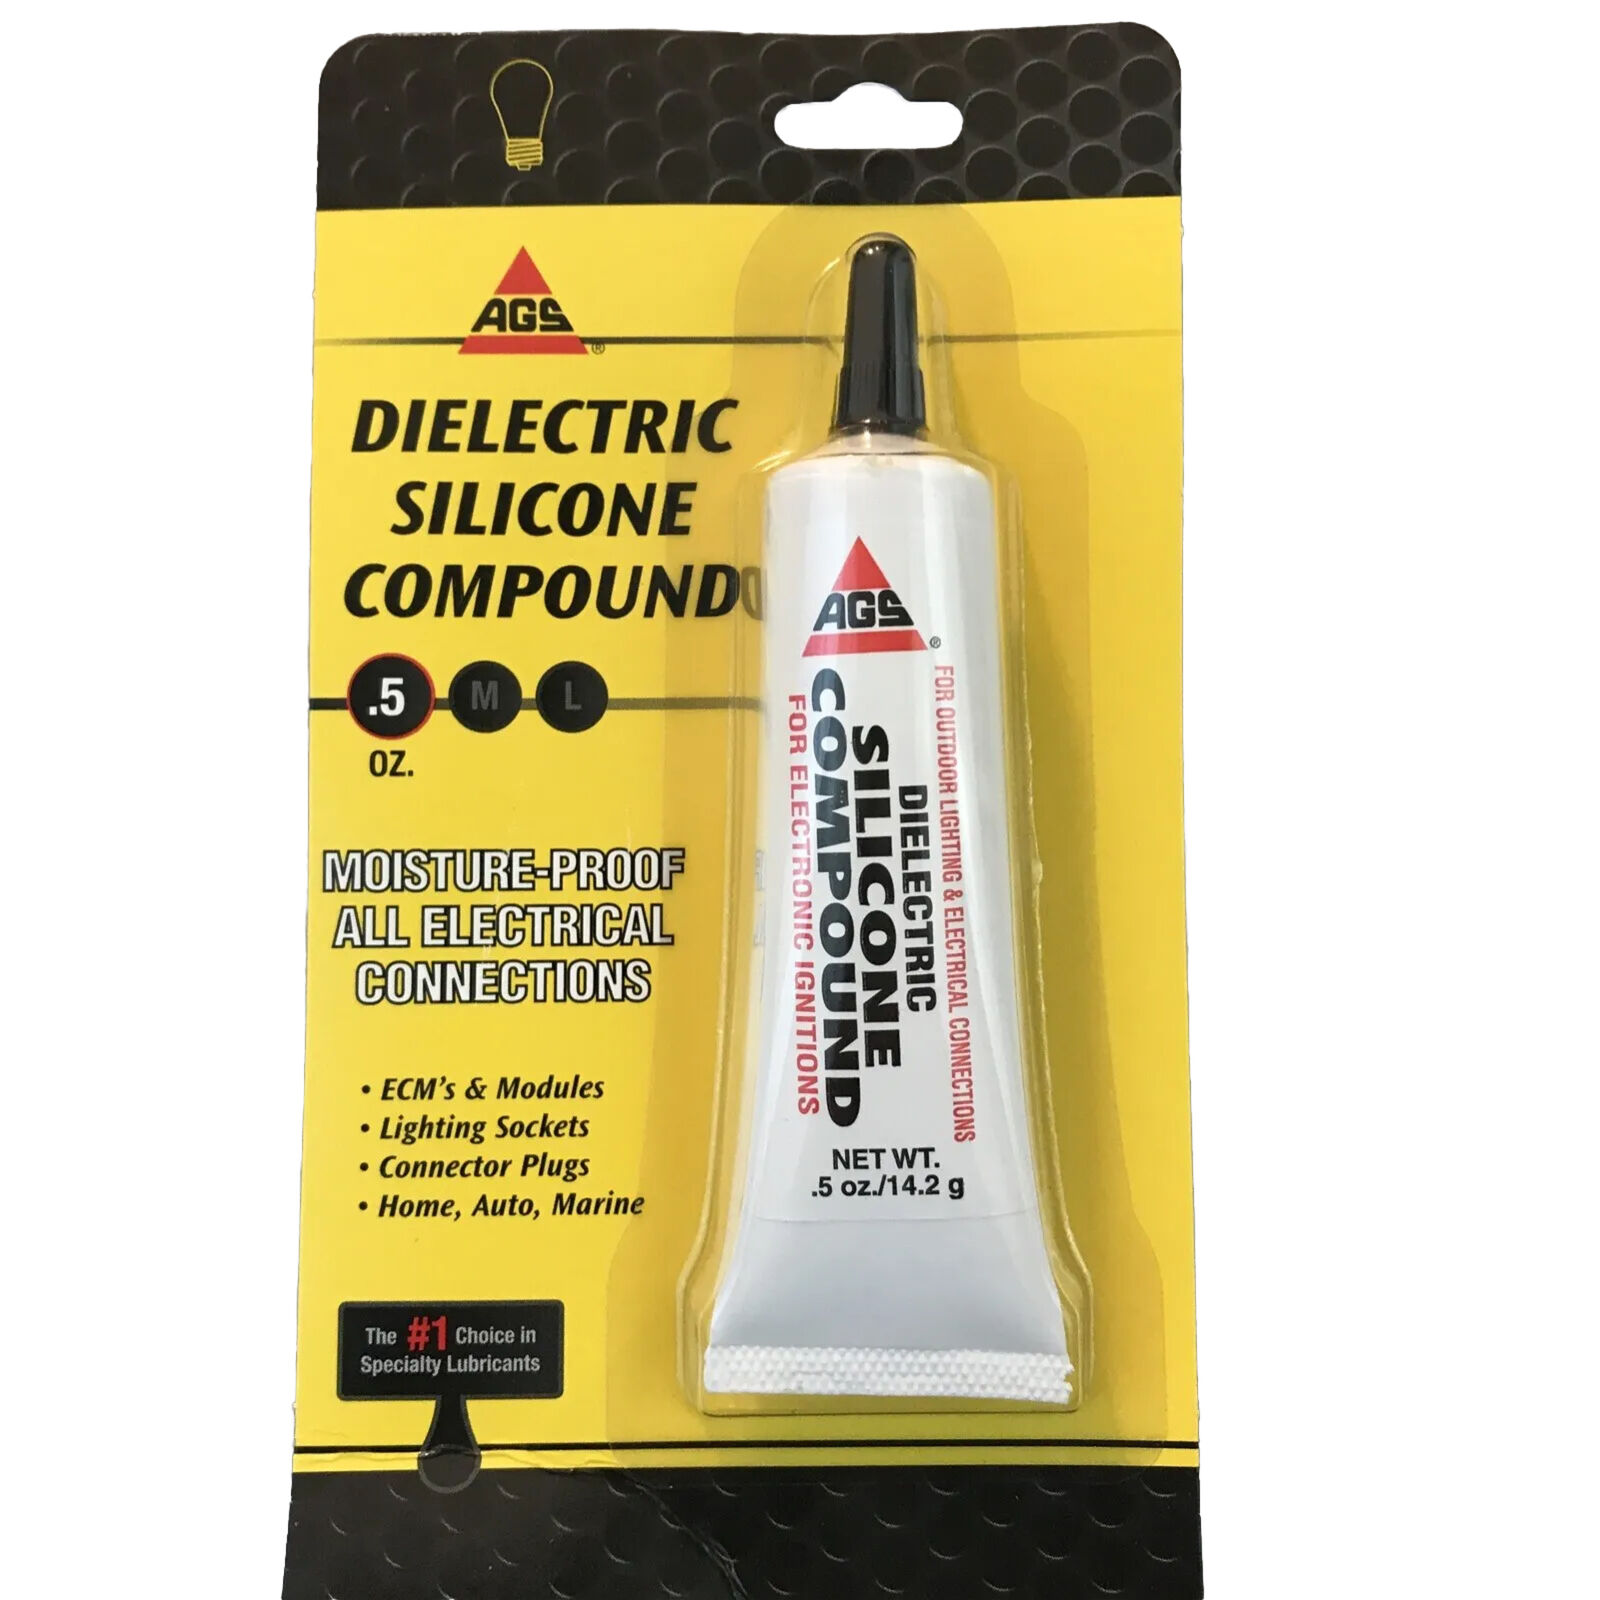 AGS DIELECTRIC SILICONE COMPOUND .5 Oz. Moisture Proof Your Connections